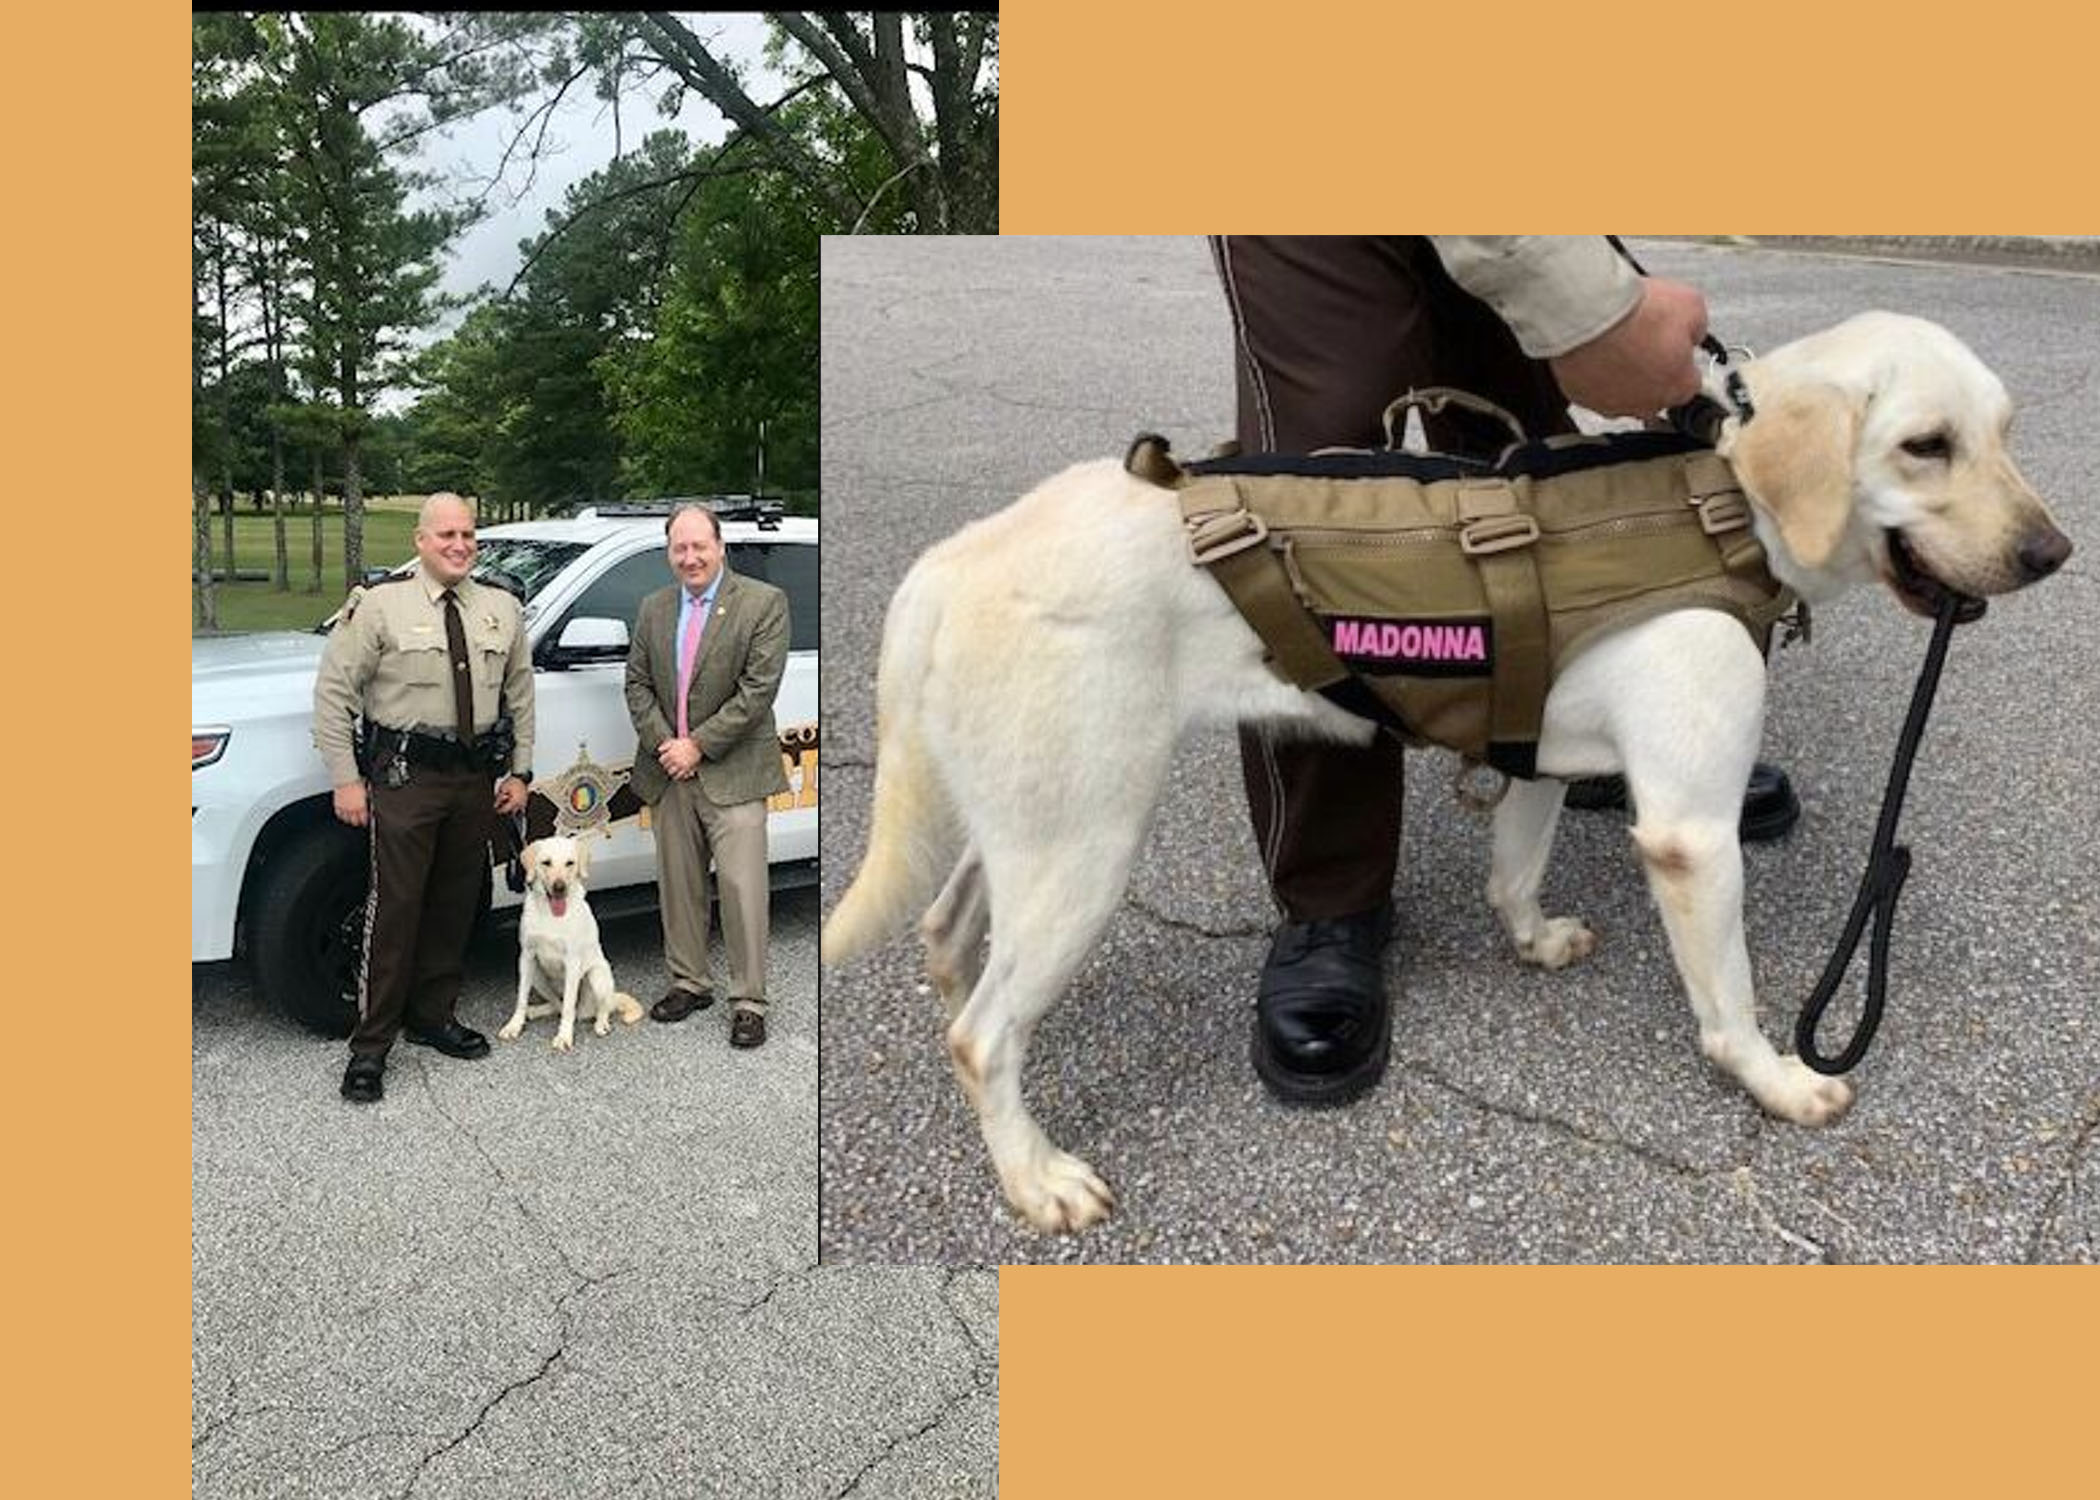 St. Clair County welcomes new K9 to 'sniff out crime'